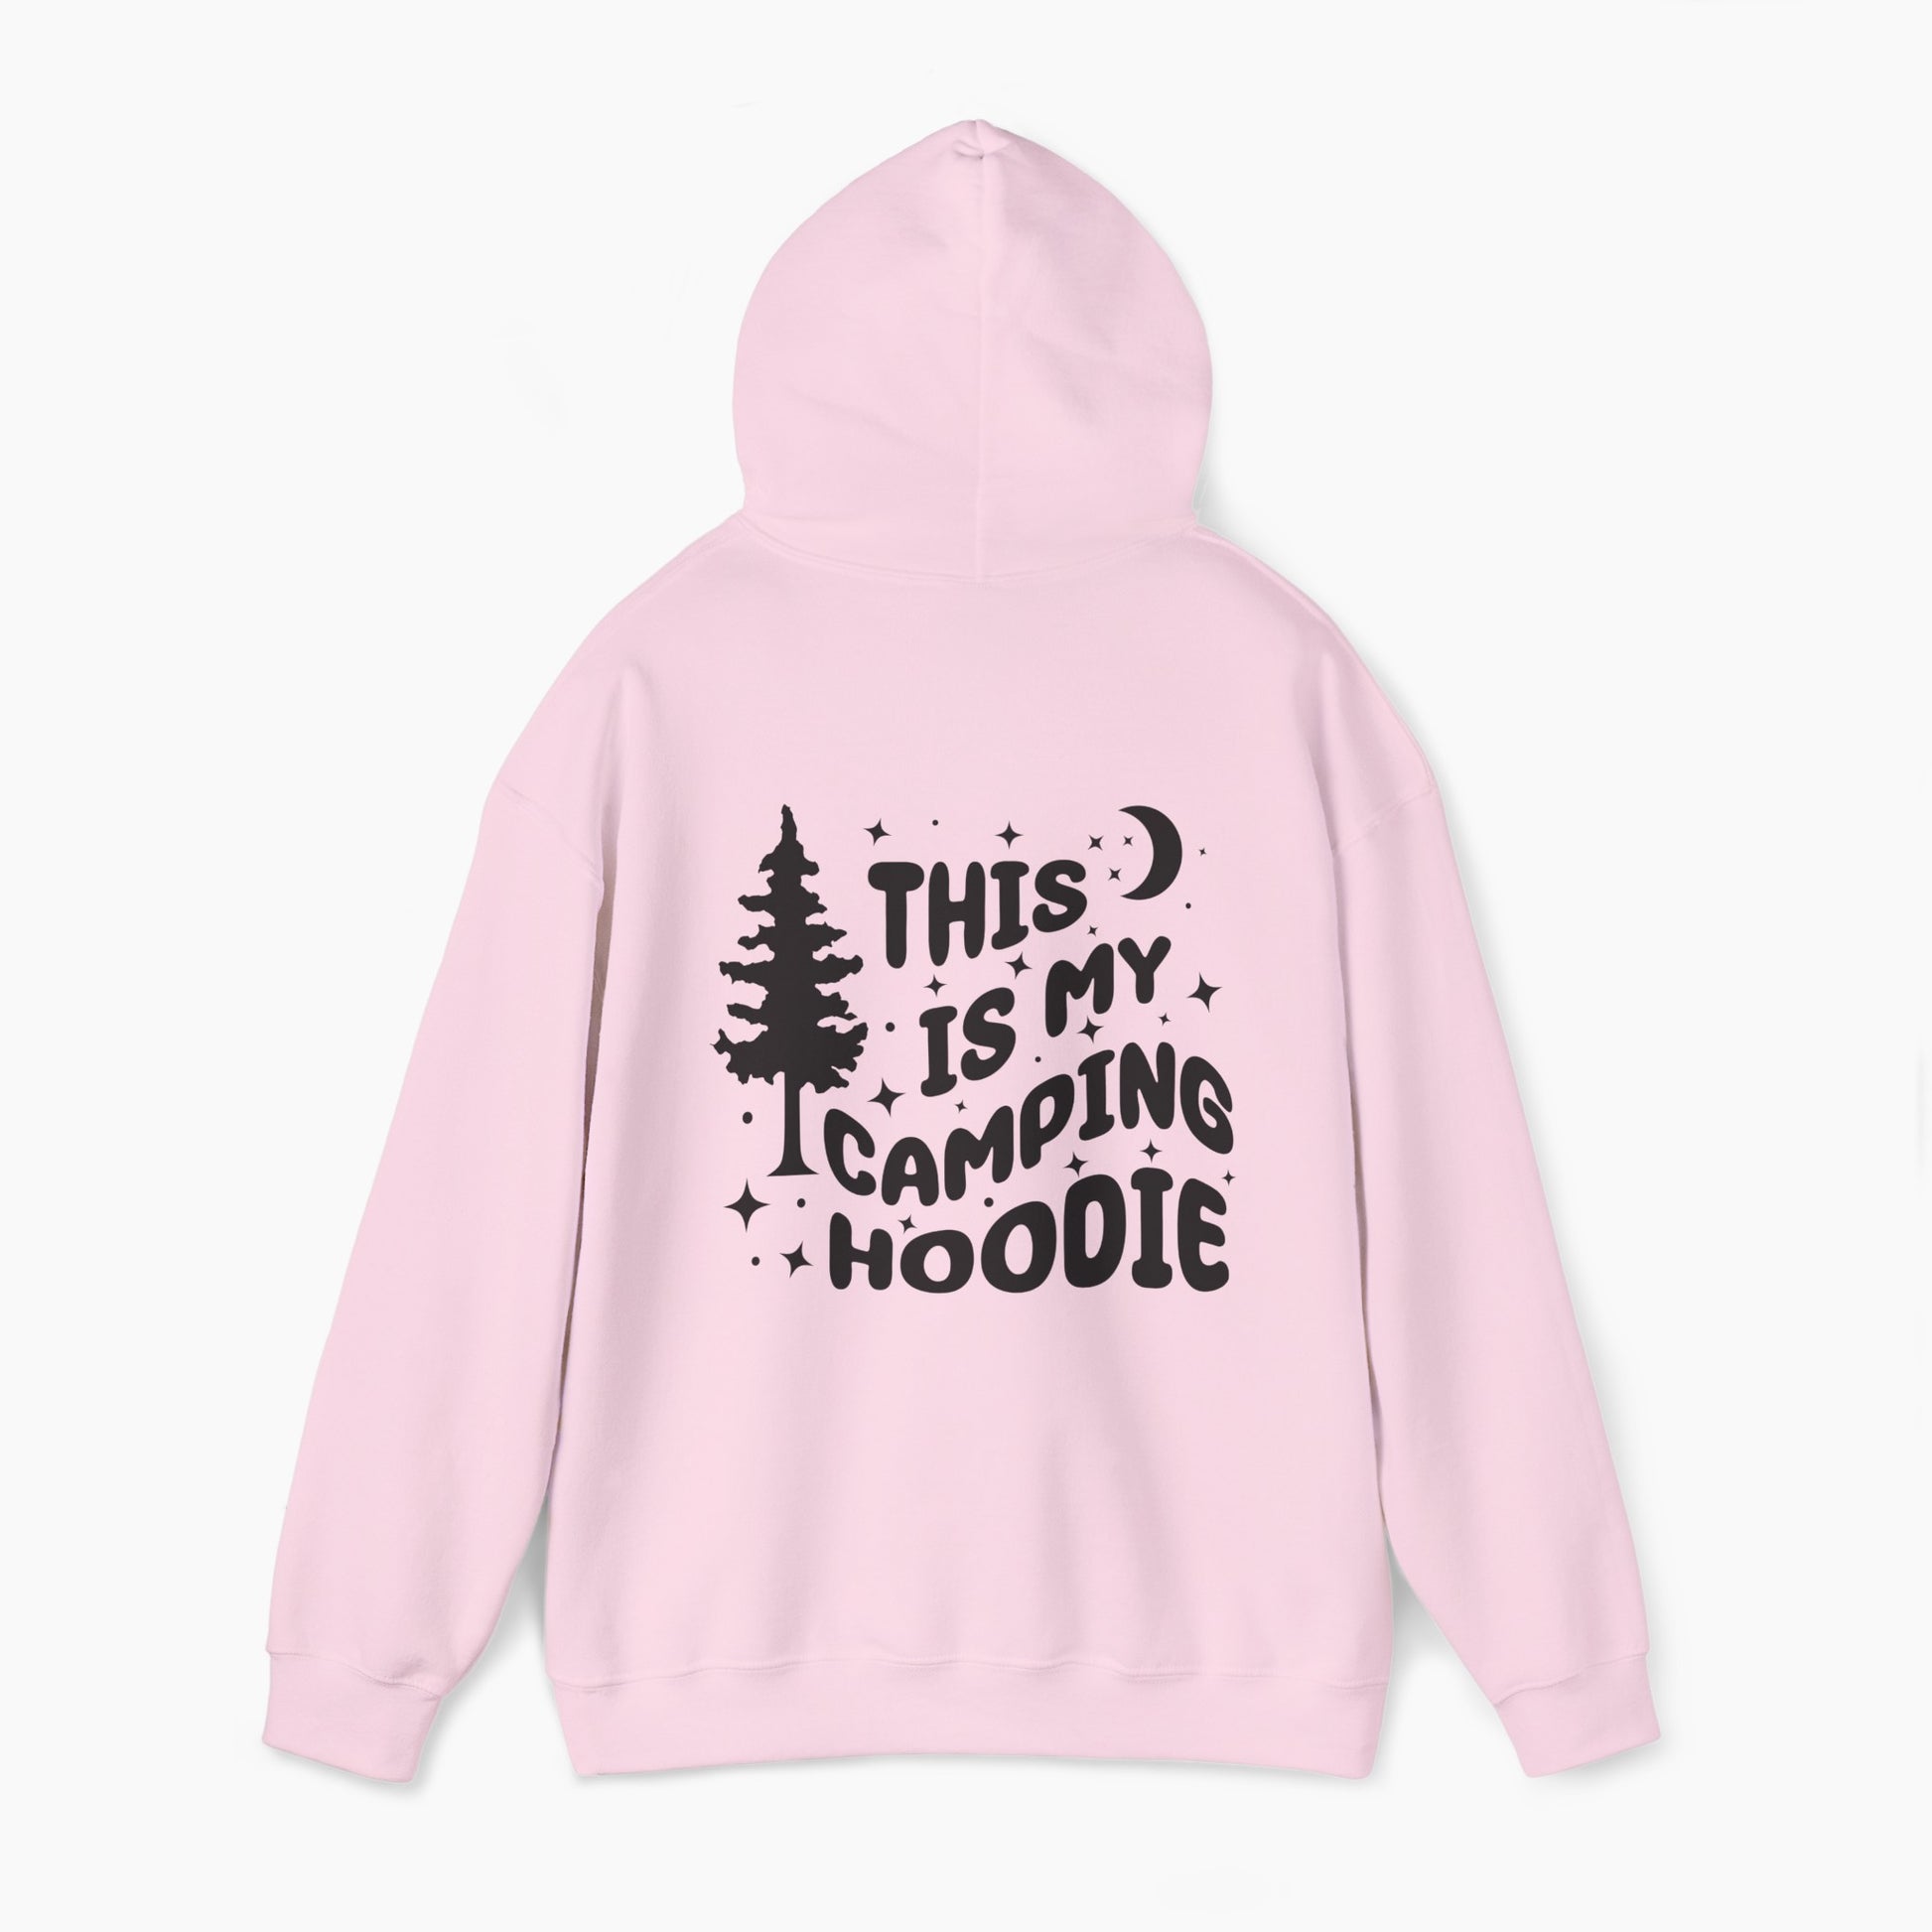 Back of light pink hoodie featuring the text 'This is my camping hoodie,' with a design of a camping van, moon, stars, and a tree on a plain background.